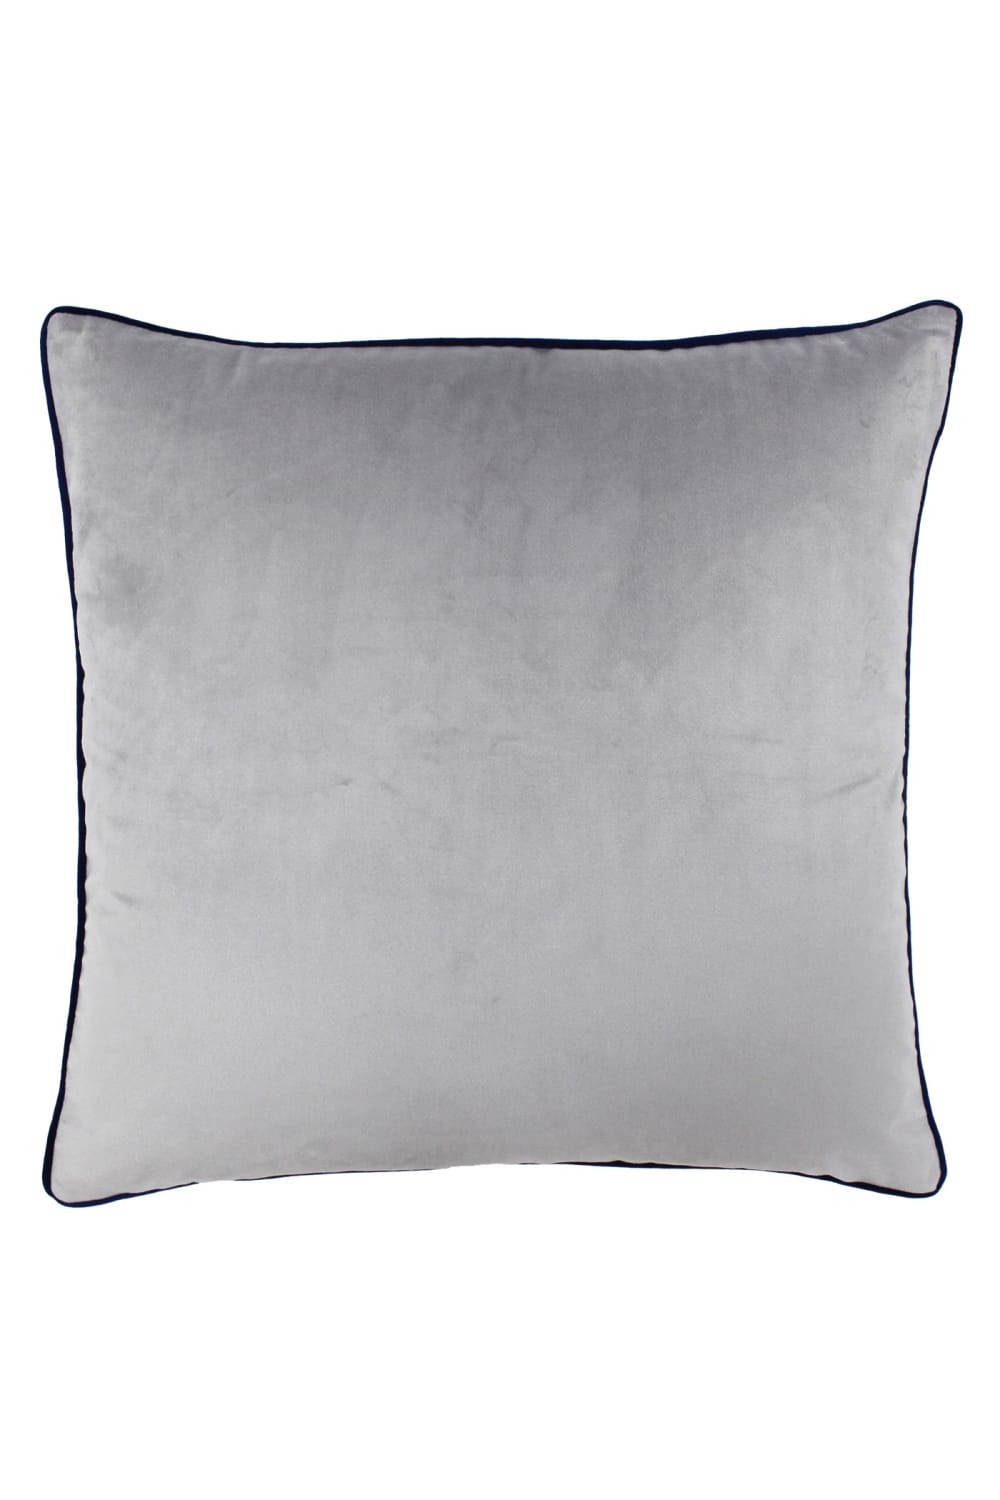 Riva Home Meridian Pillow Cover (Silver/Navy) (21.6 x 21.6in)